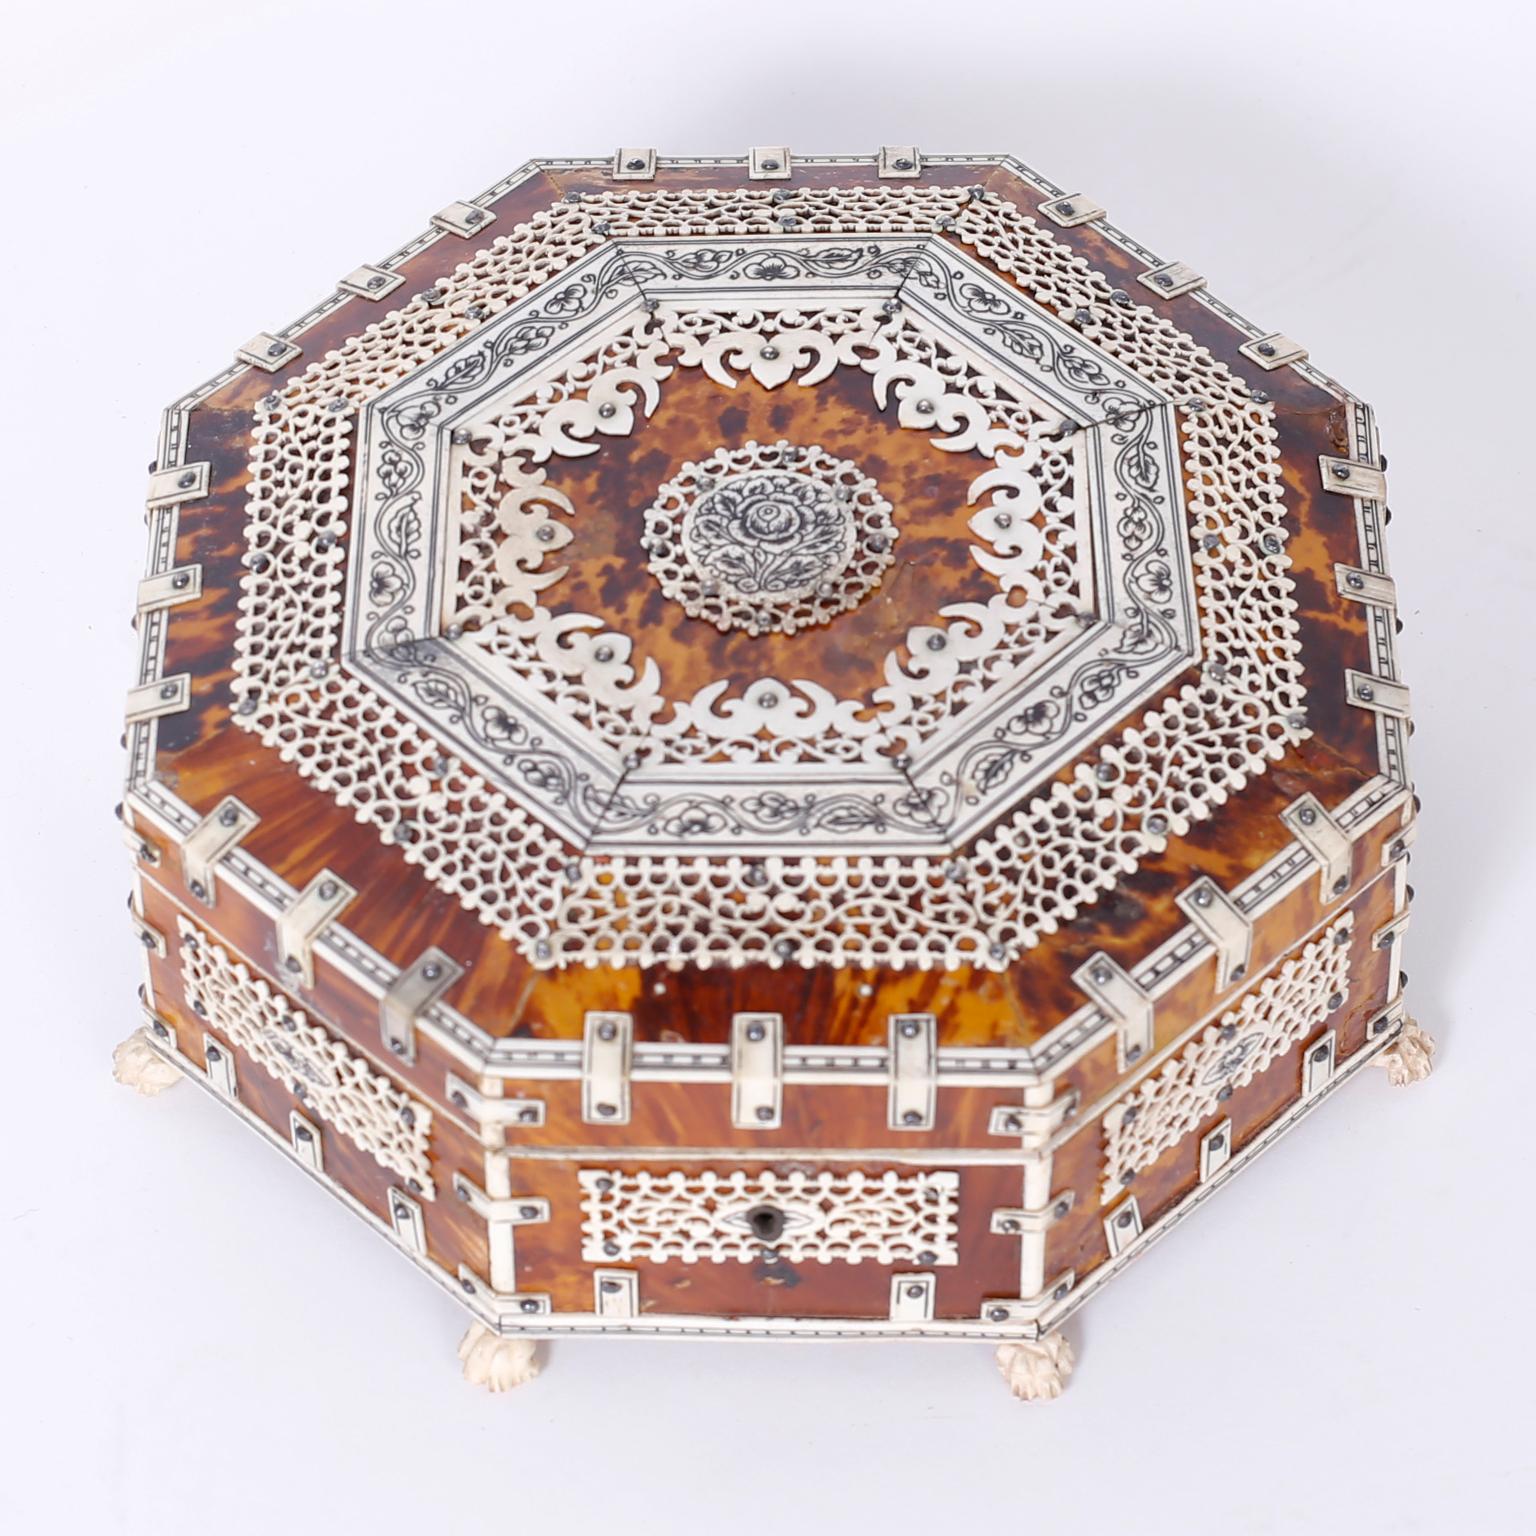 Antique Anglo-Indian octagon shaped jewelry or decorative box clad in tortoiseshell and elaborately decorated with carved bone. The inside has a mirror and felt lining.